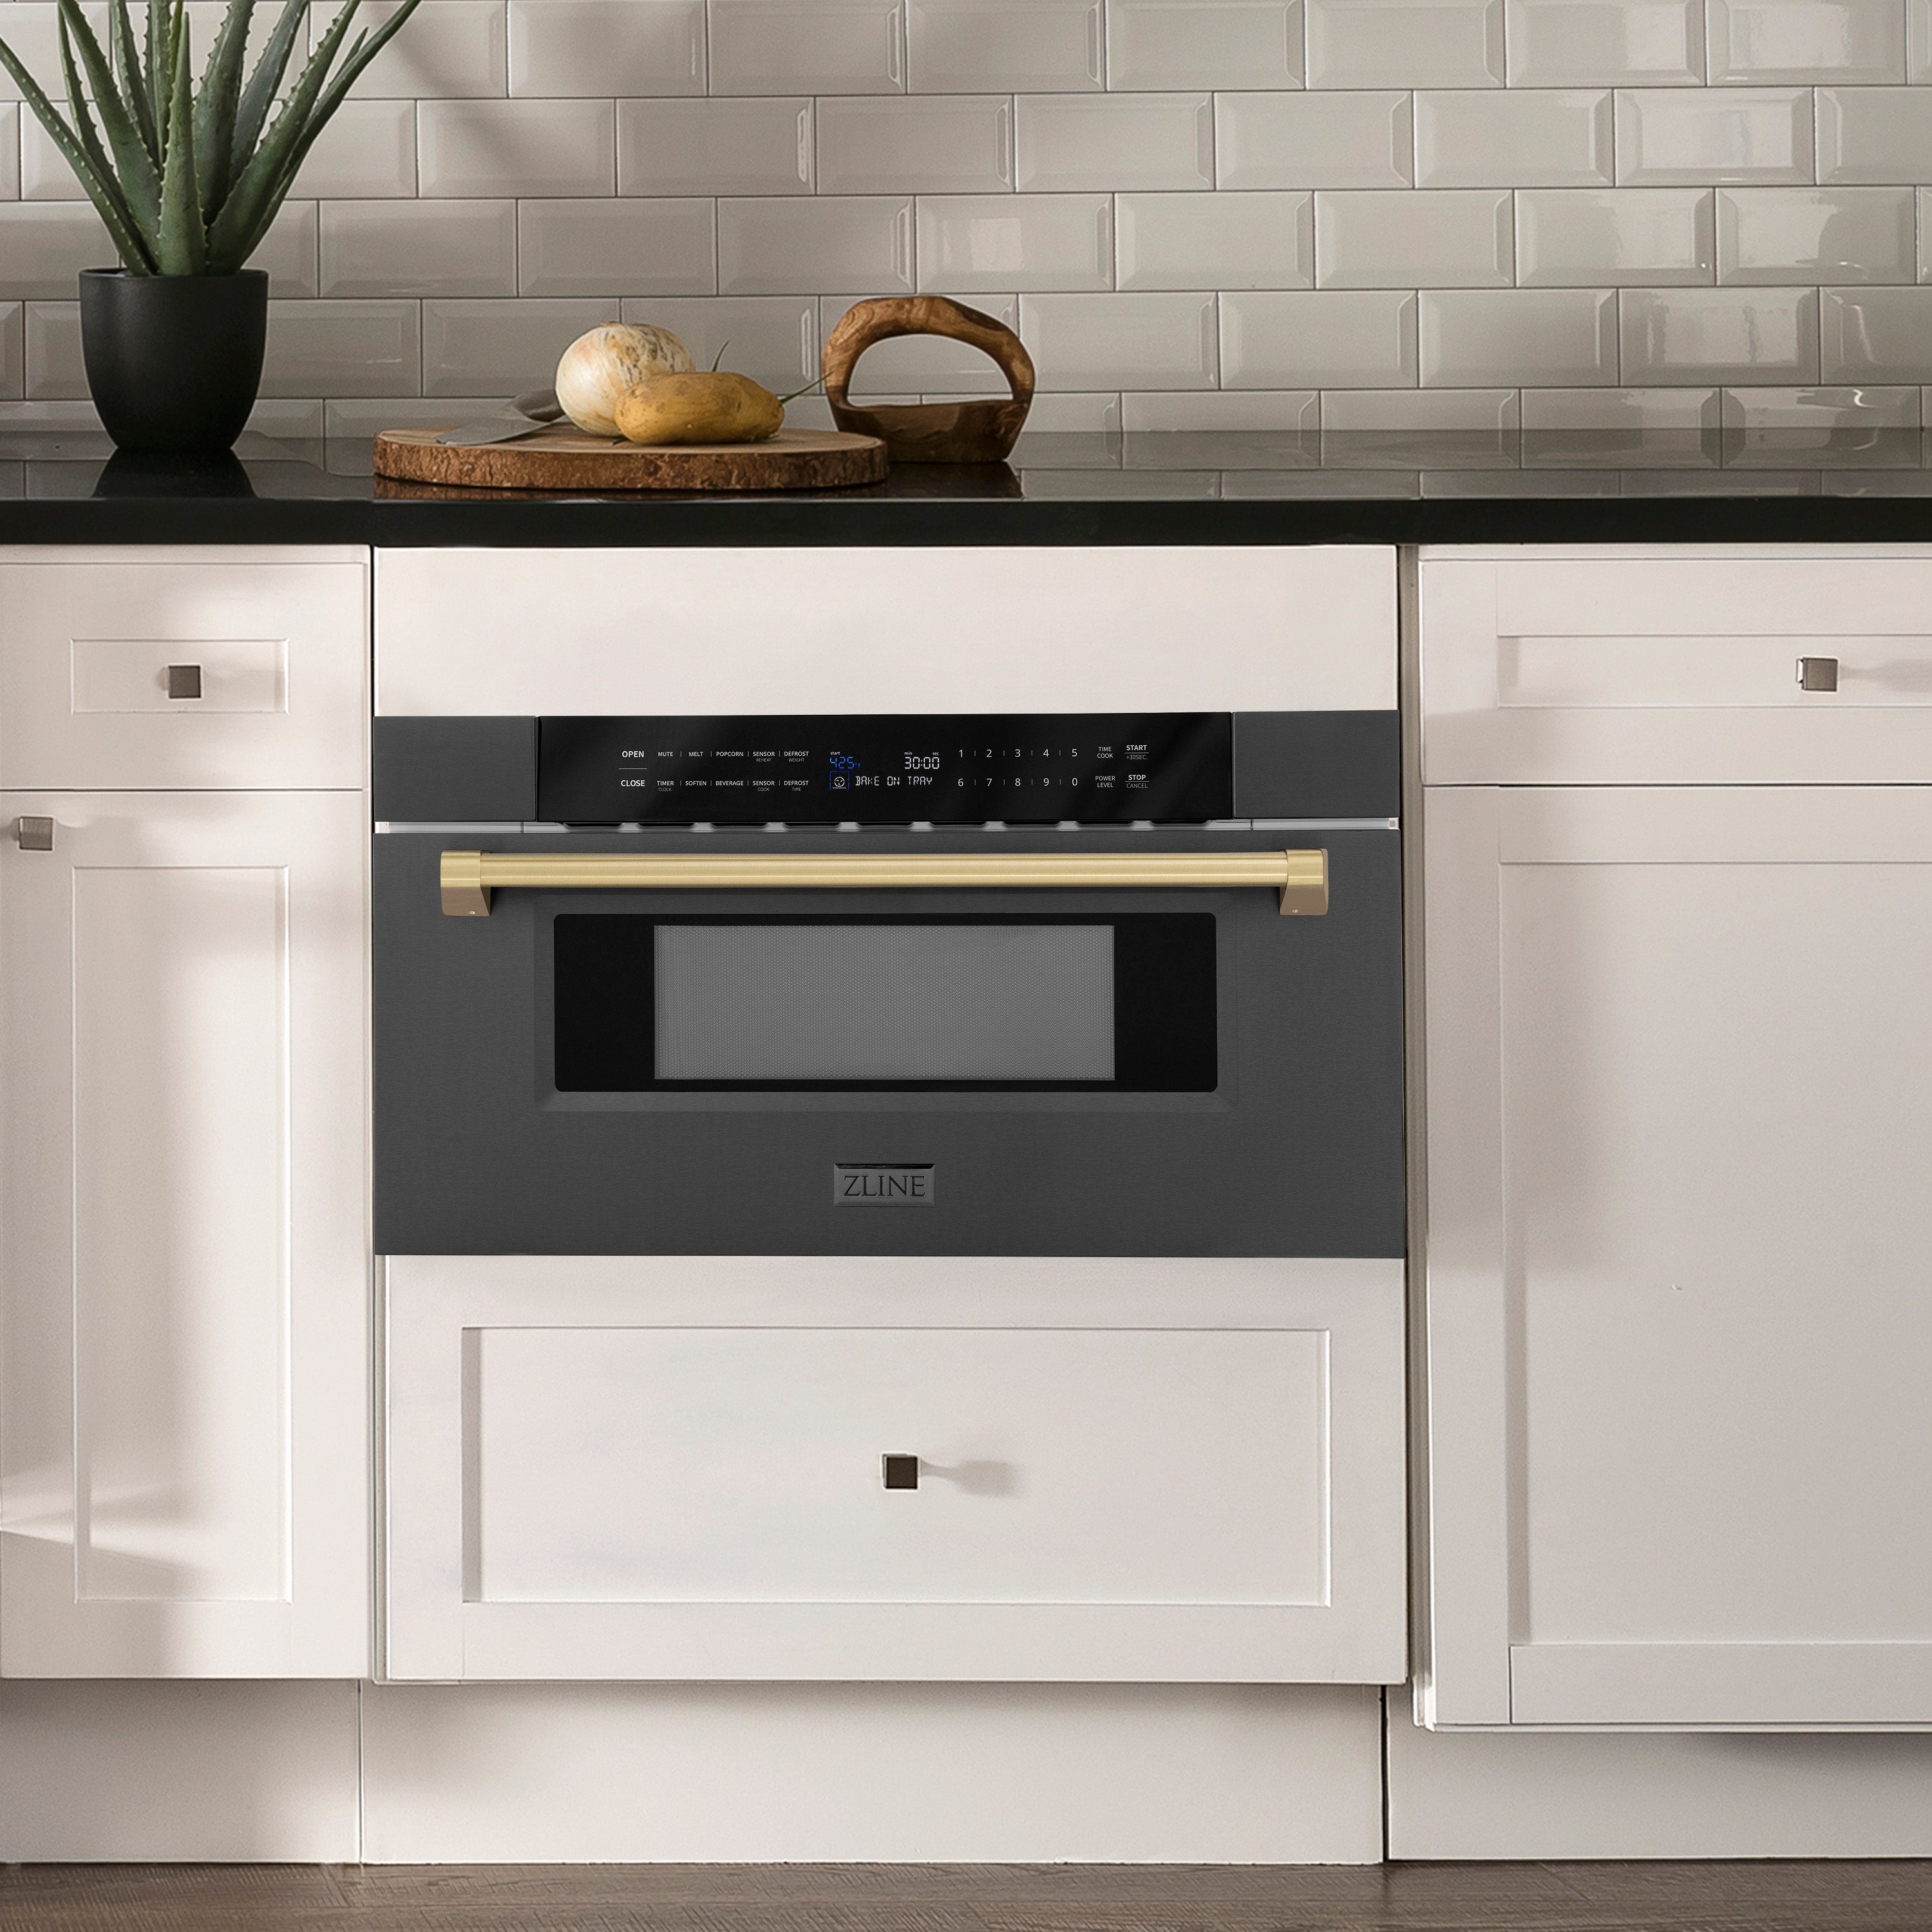 ZLINE Autograph Edition 30 in. 1.2 cu. ft. Built-in Microwave Drawer in Black Stainless Steel with Champagne Bronze Accents (MWDZ-30-BS-CB) in Rustic Farmhouse Style Kitchen with white cabinets and black countertops.